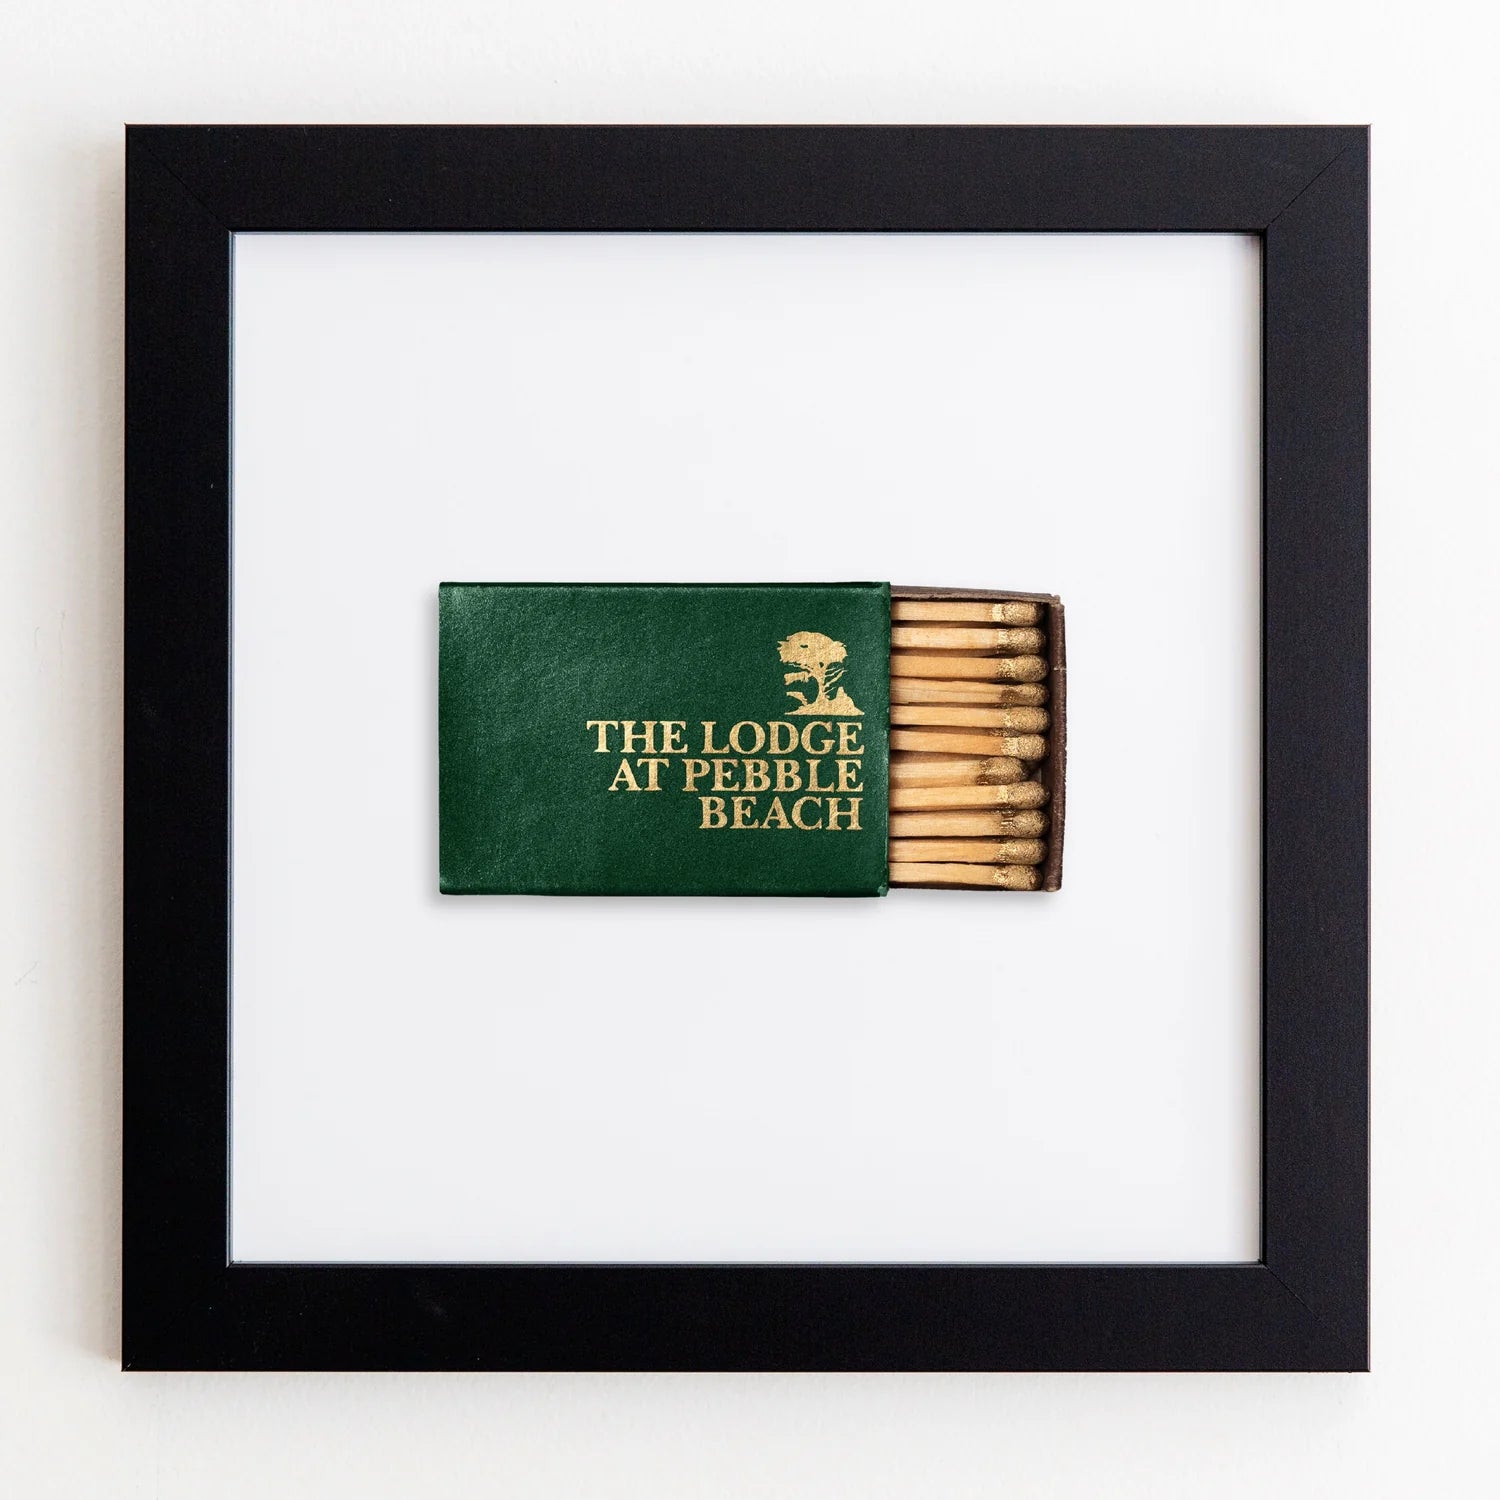 A framed acrylic display featuring a dark green book titled &quot;The Lodge at Pebble Beach&quot; with its spine exposed, revealing a series of matches integrated into the book design, against a white background by Match South&#39;s Art Square Black Frame.